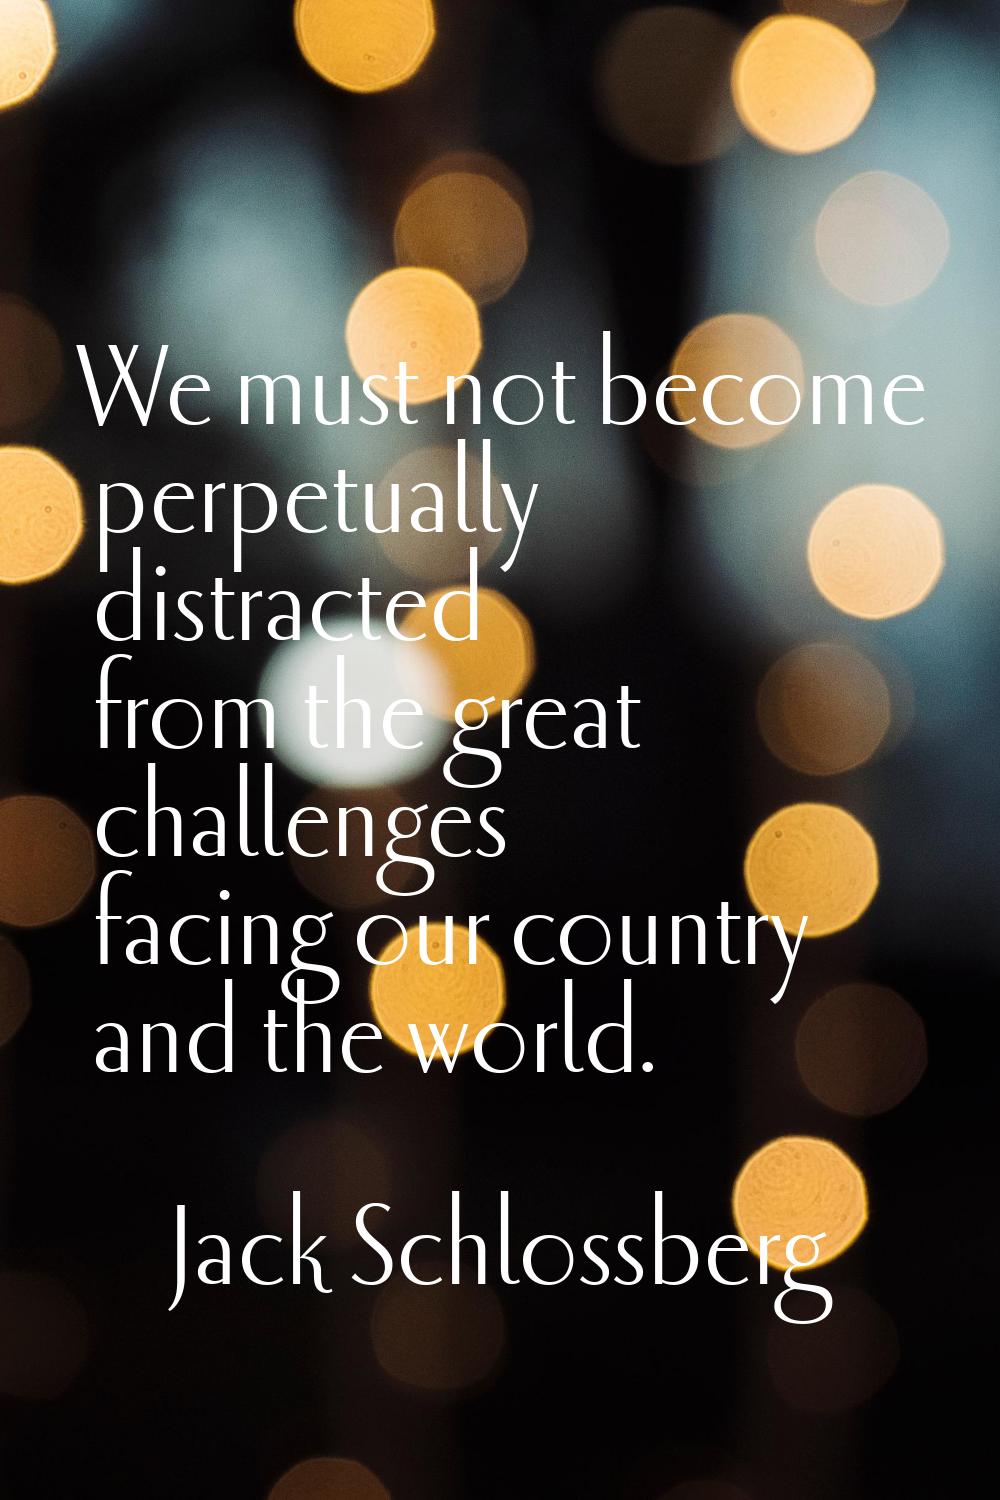 We must not become perpetually distracted from the great challenges facing our country and the worl